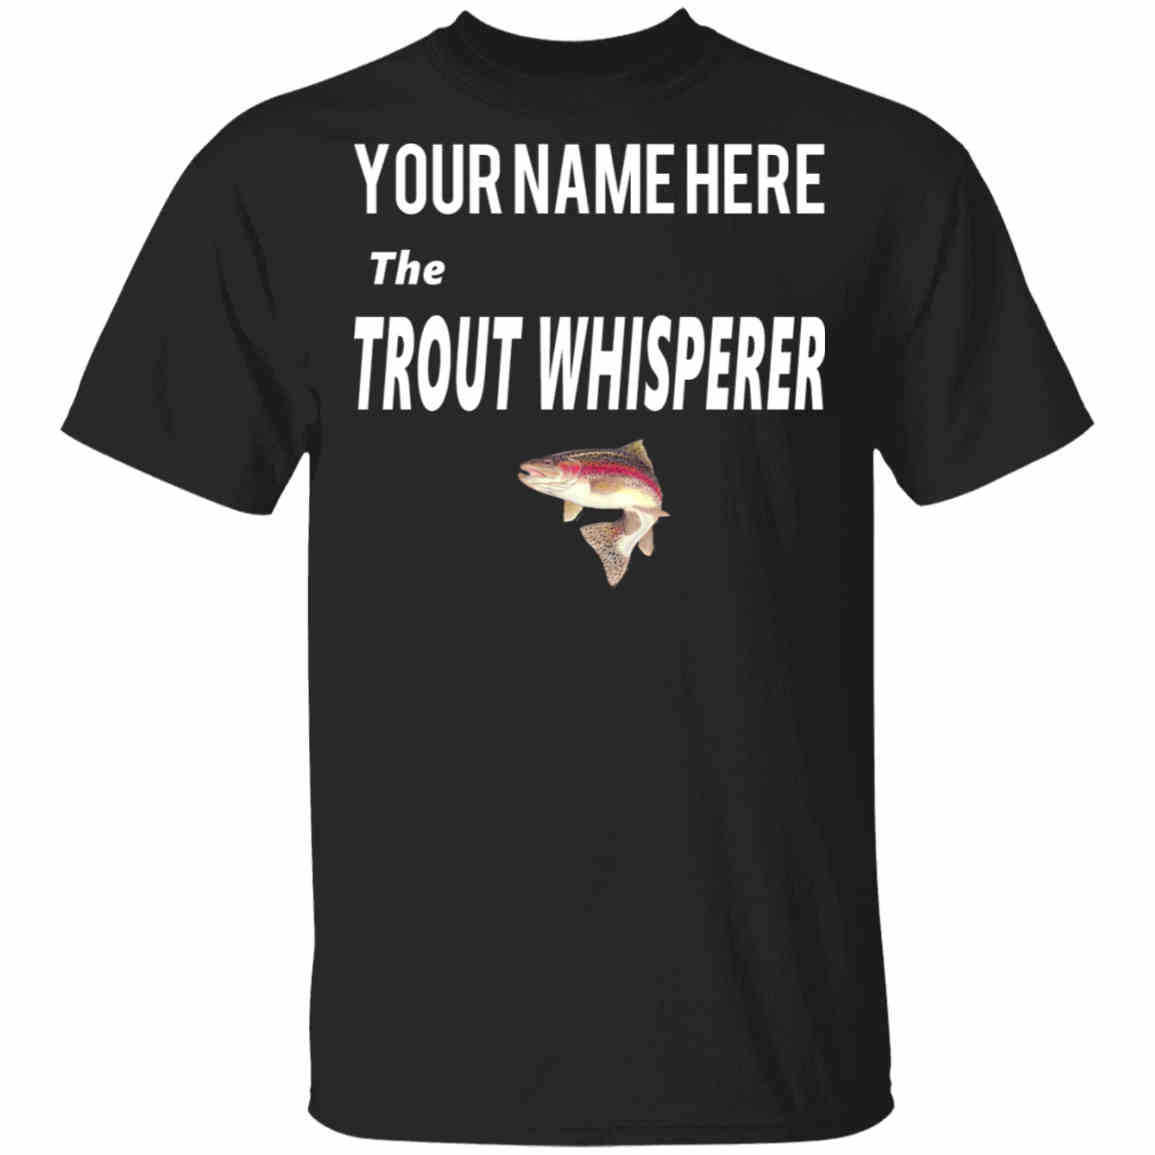 Personalized trout whisperer t-shirt w black